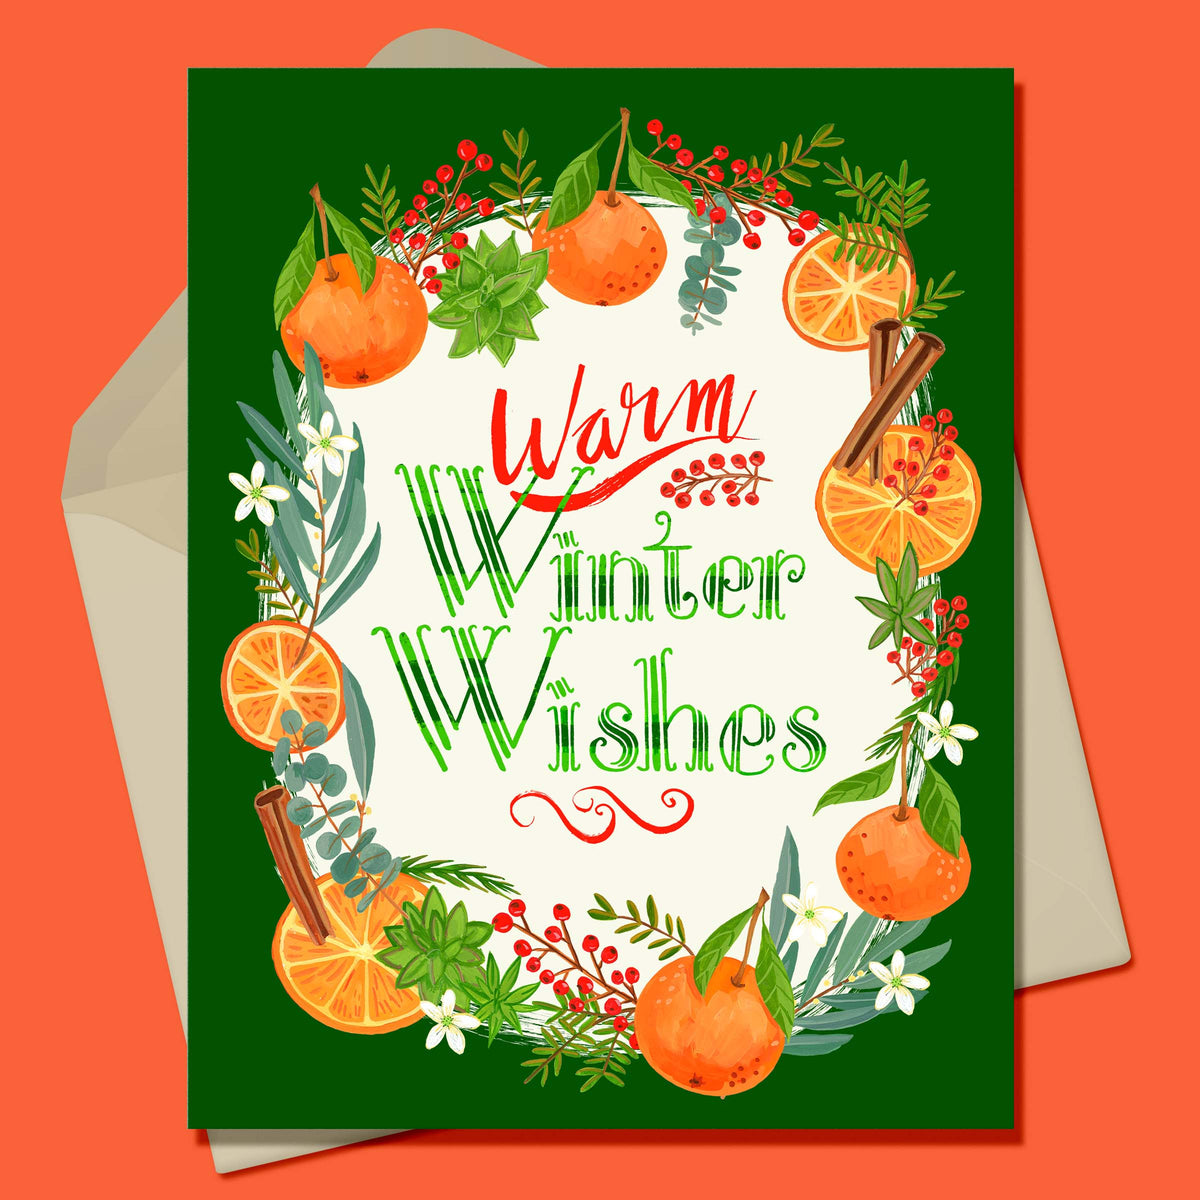 Boxed Set of 8 Cards-Warm Winter Wishes Greeting Cards